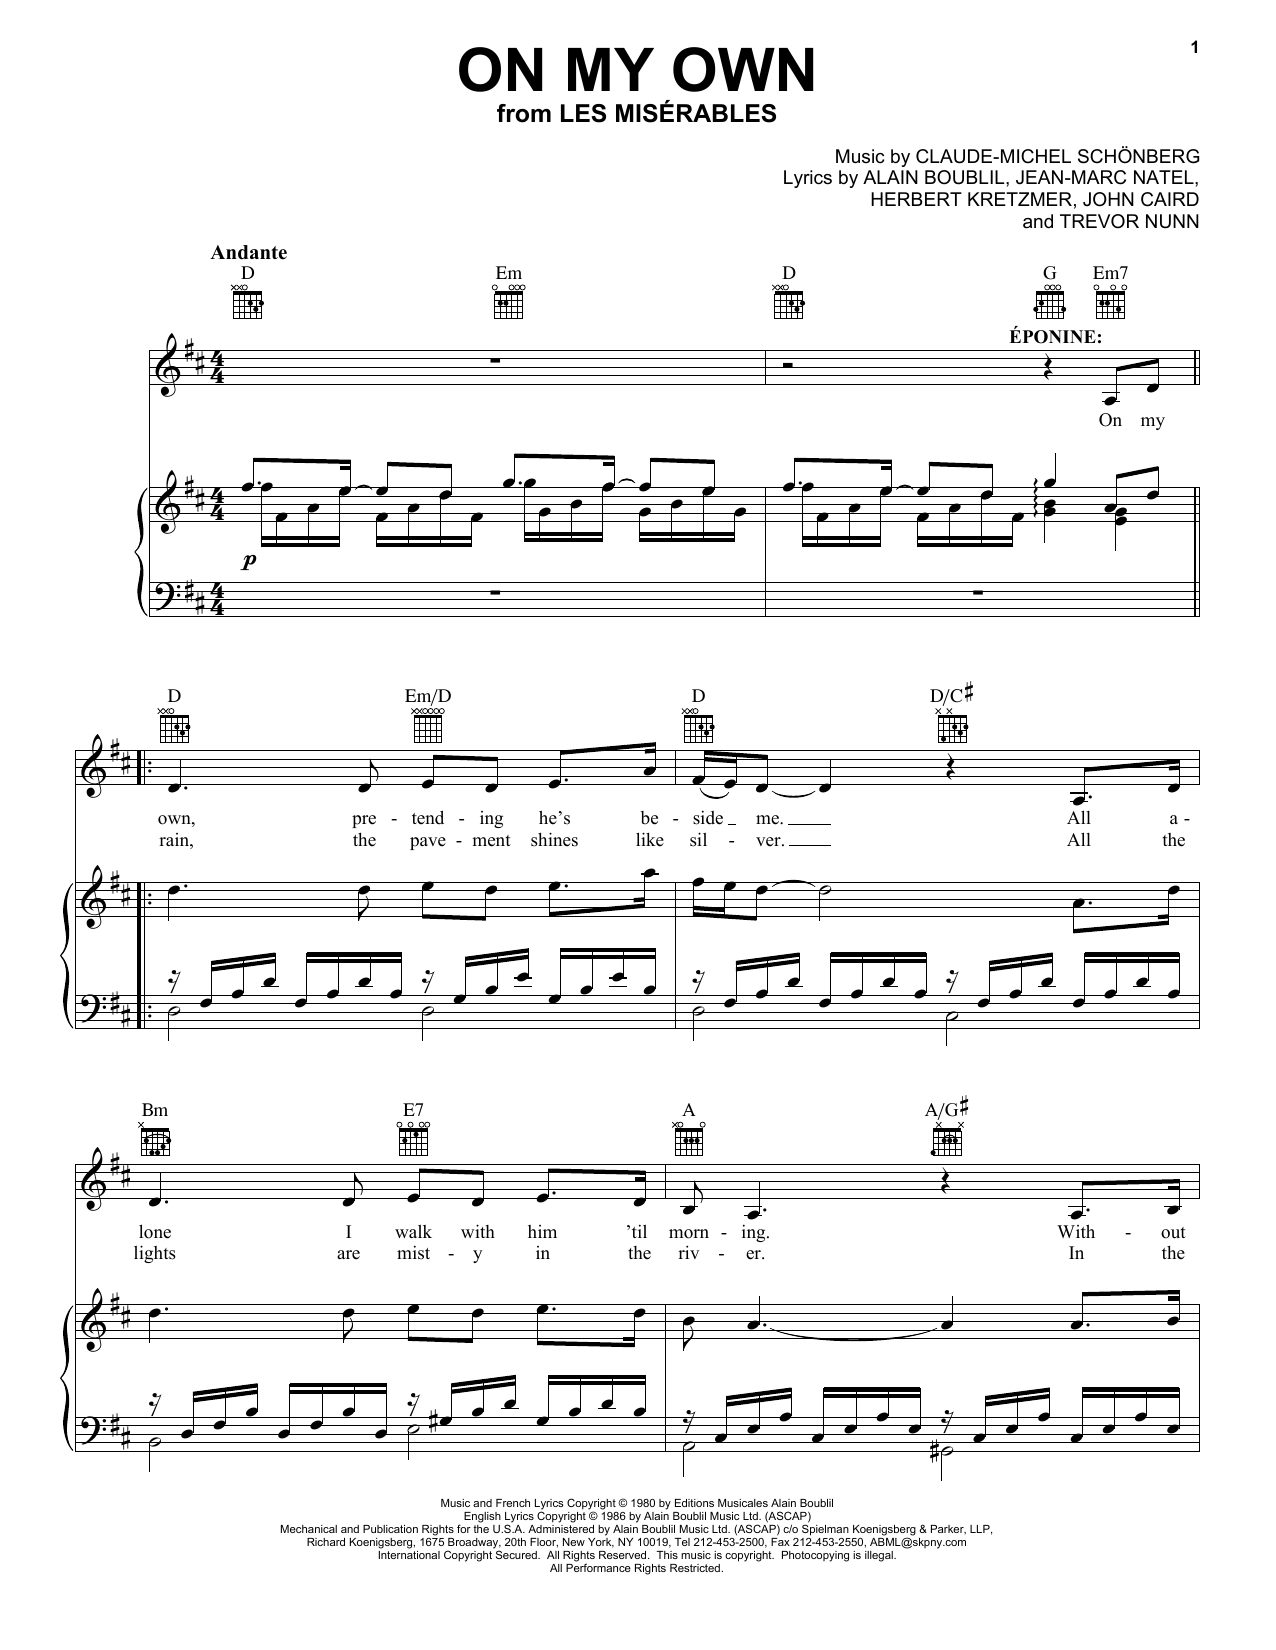 Alain Boublil "On My Own (from Les Miserables)" Sheet Music | Download Printable Musical/Show PDF Score | How Play SKU 64819